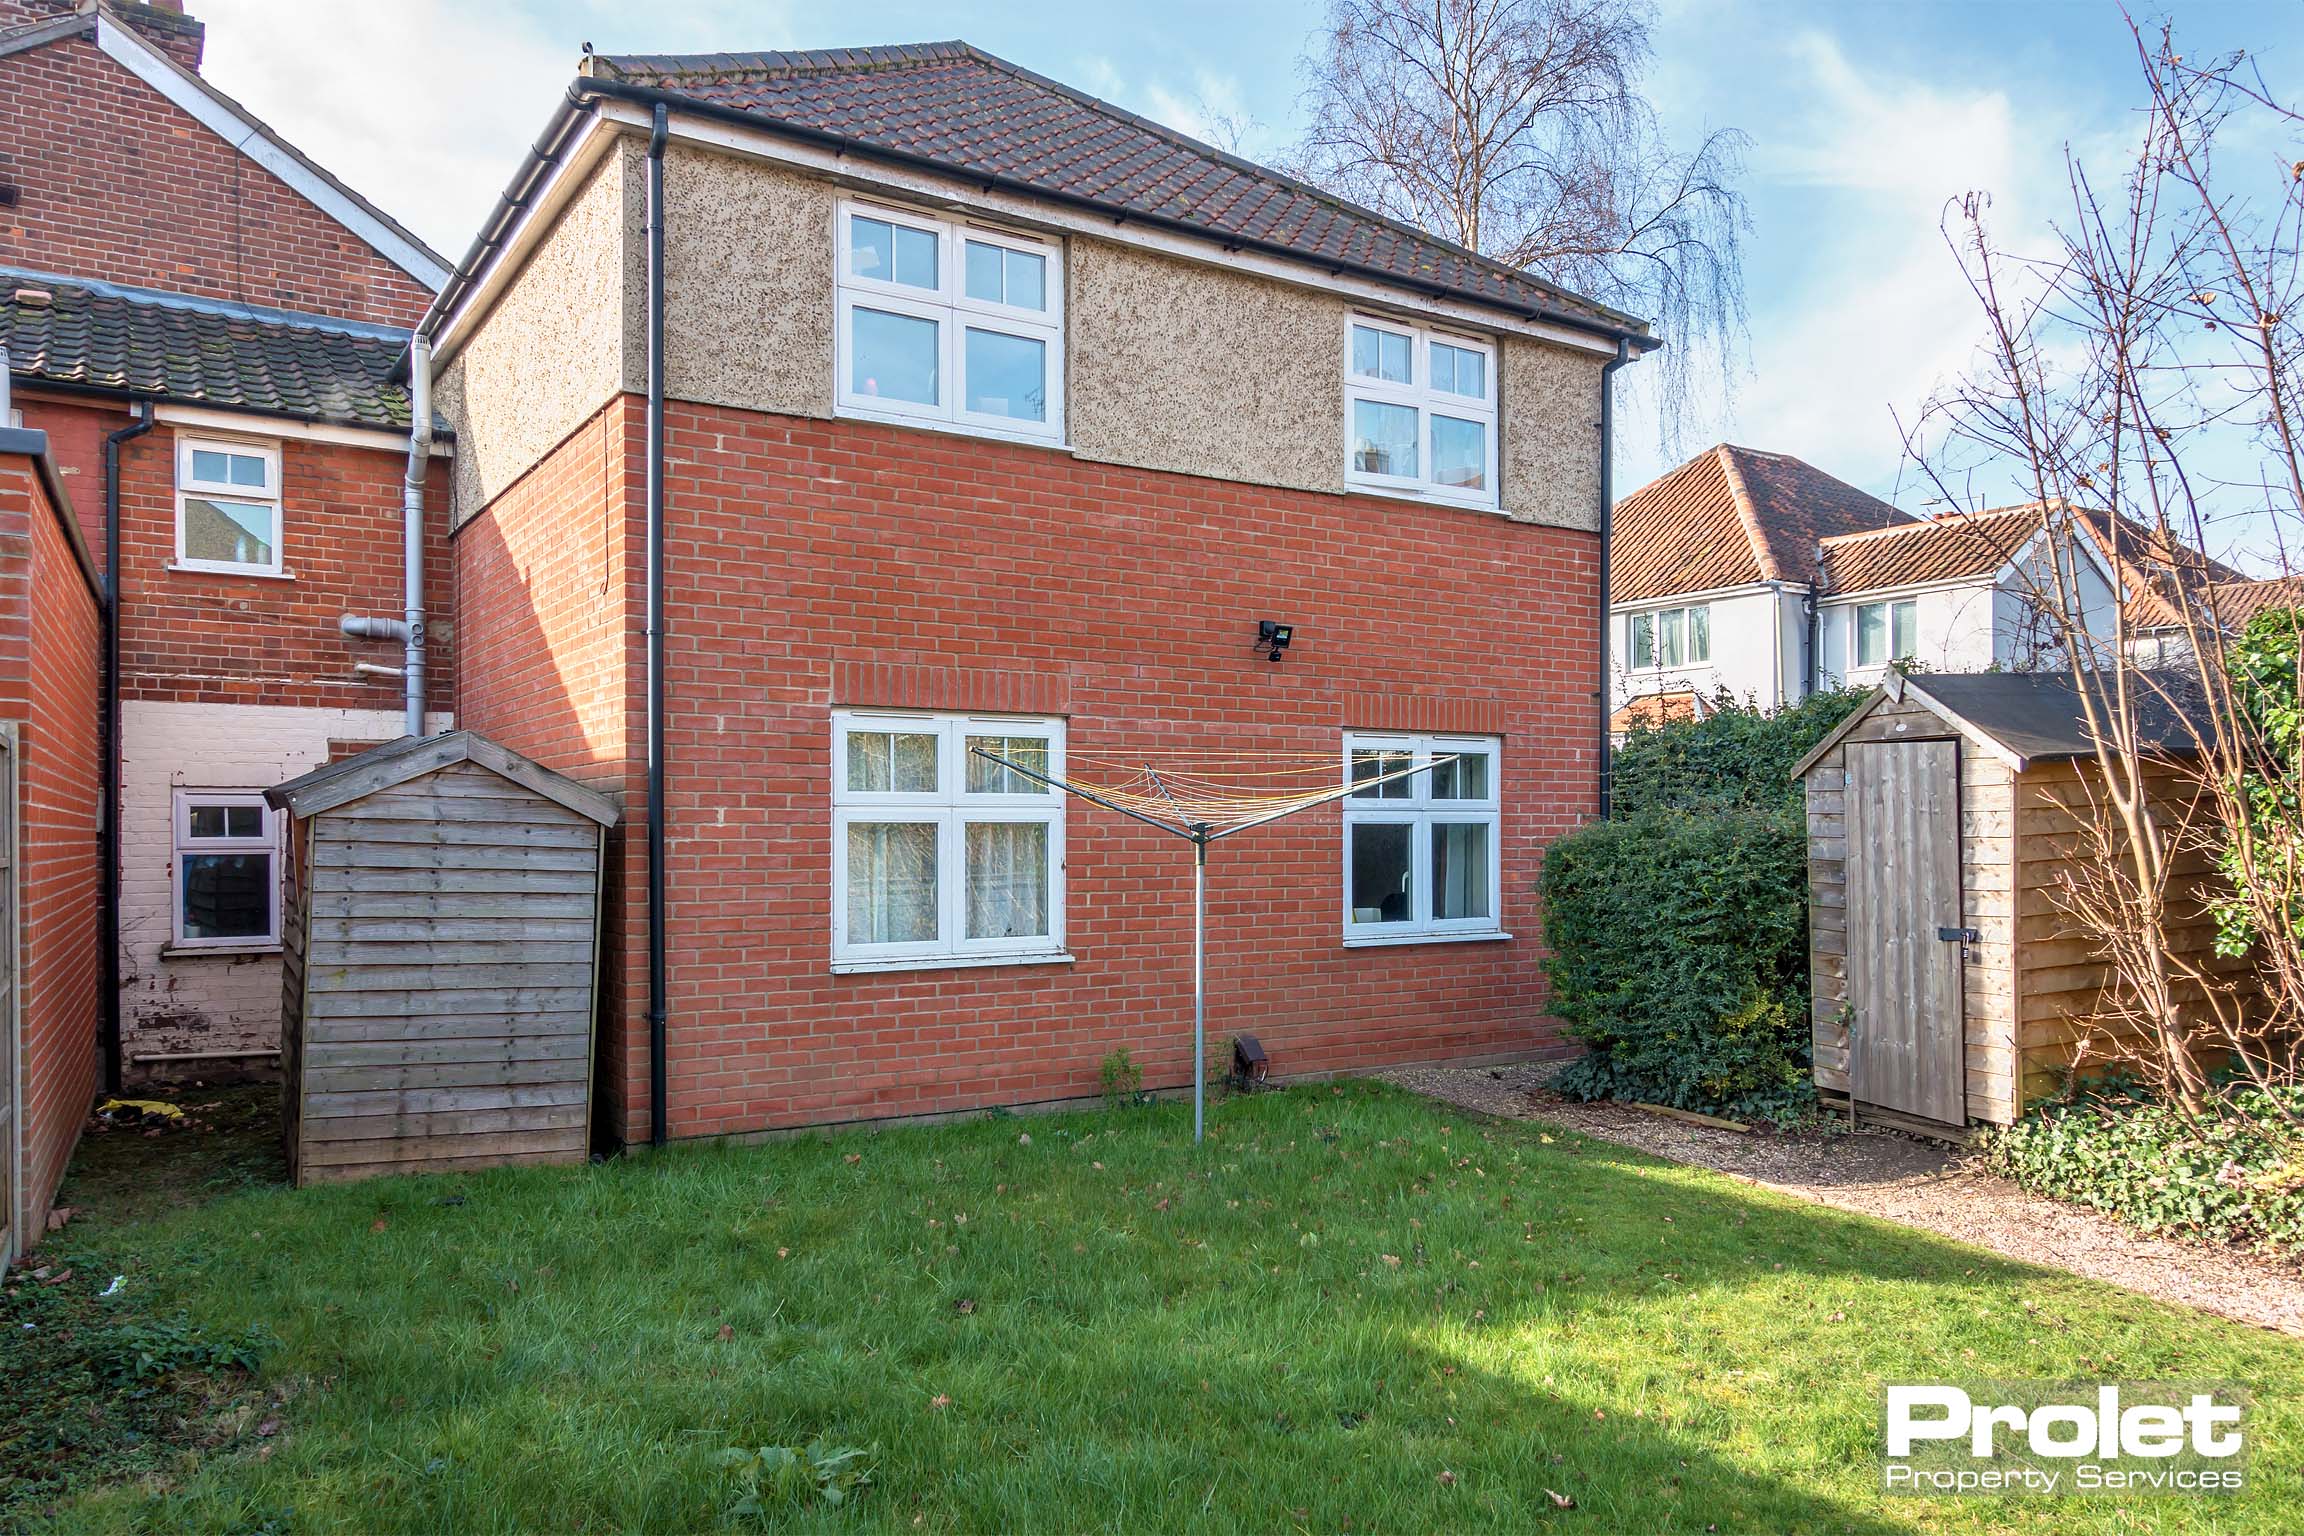 Booking a viewing for Muriel Road, Norwich NR2 3NY